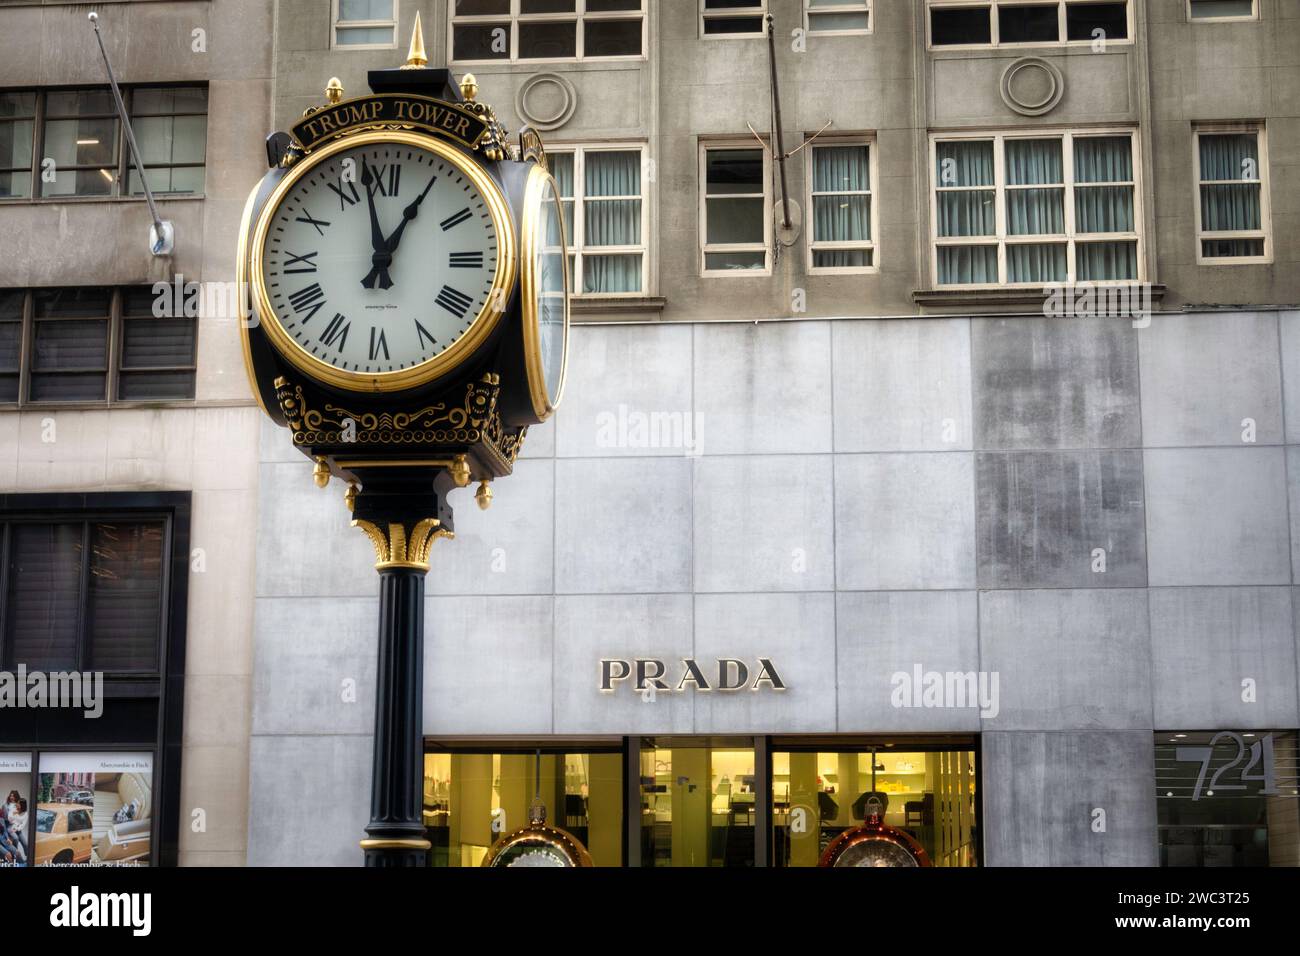 The Trump Tower sidewalk clock stands across the street from the Prada store, New York City, USA  2024 Stock Photo